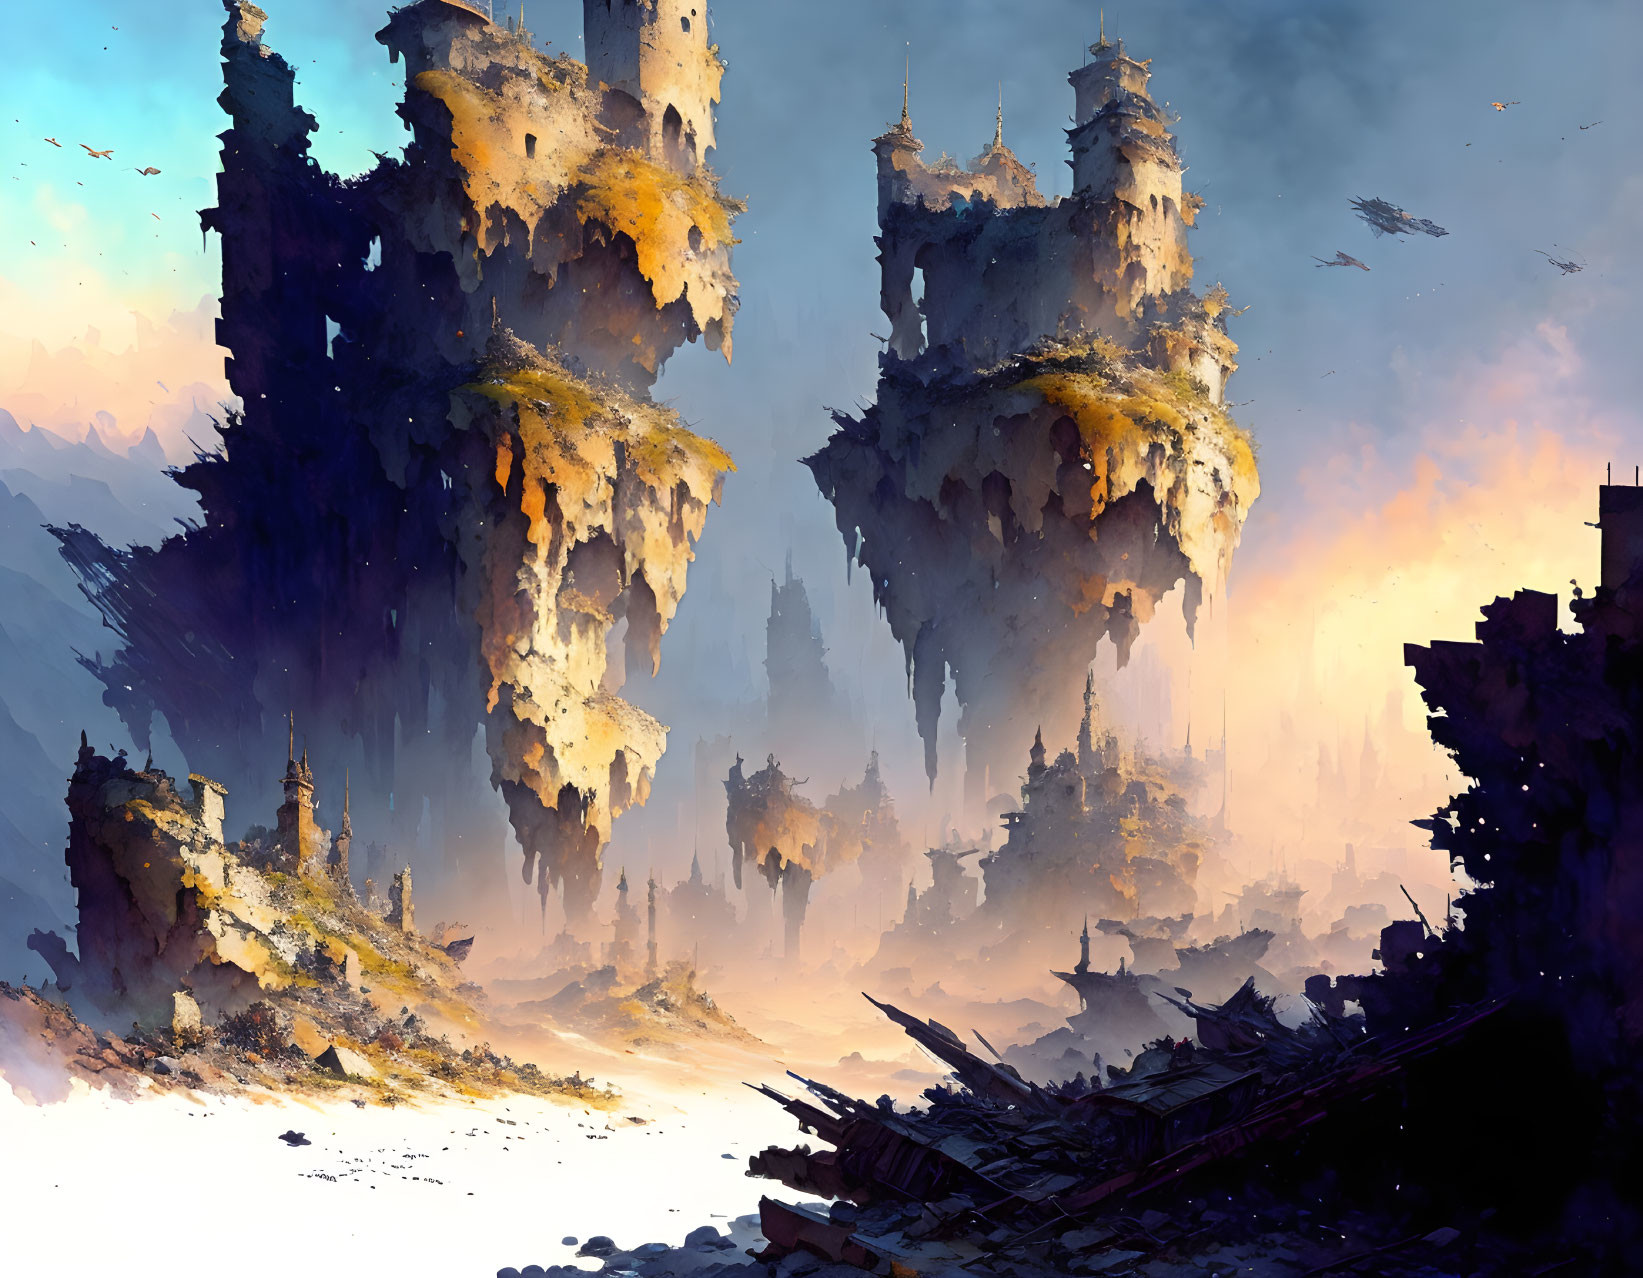 Crumbling Towers in Ruined Fantasy Landscape at Sunset